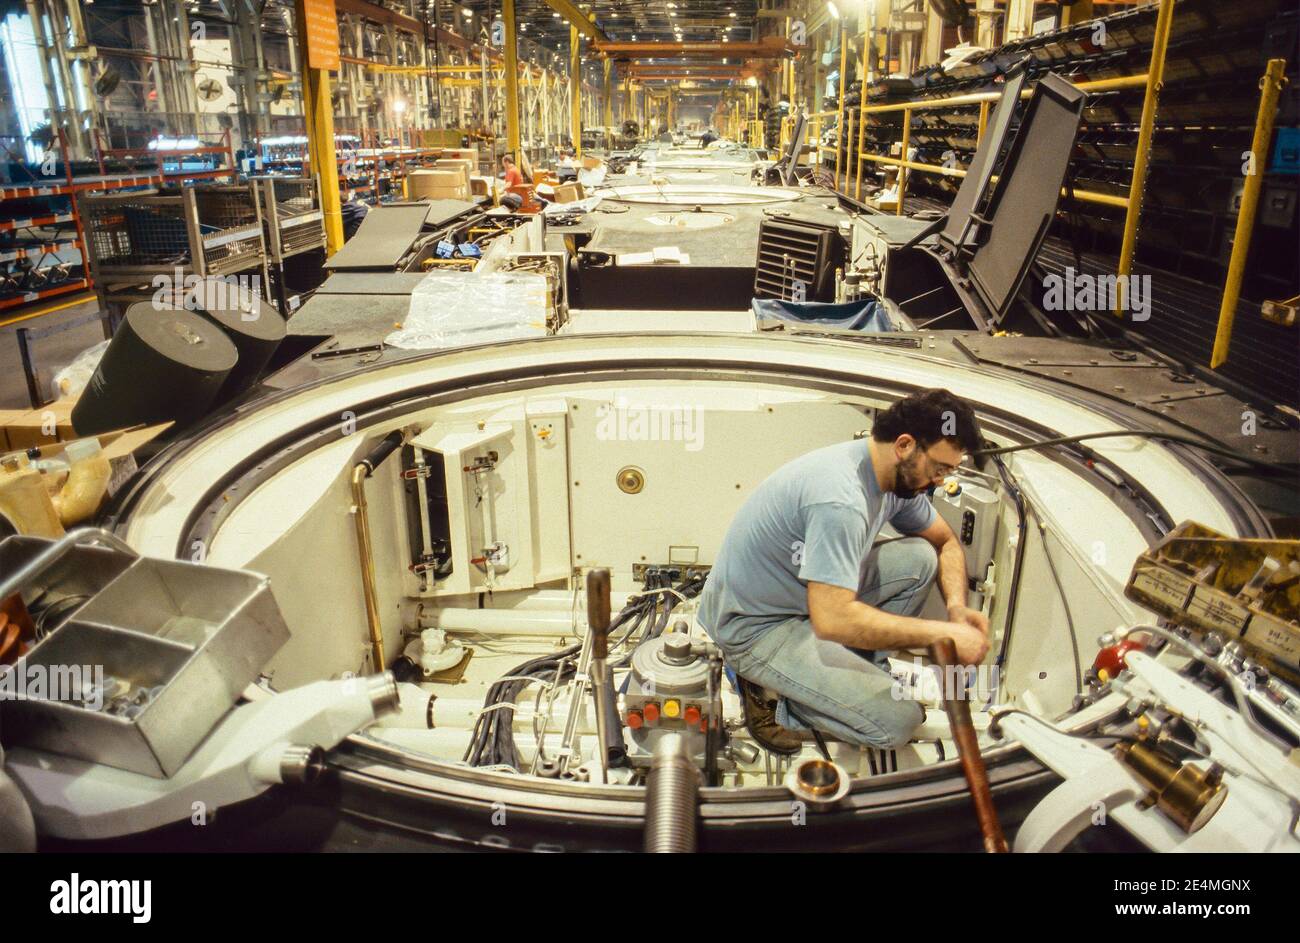 Warren, Michigan - Hull assembly line for the U.S. Army's M-1 tank at General Dynamics. Workers are members of the United Auto Workers union. Stock Photo